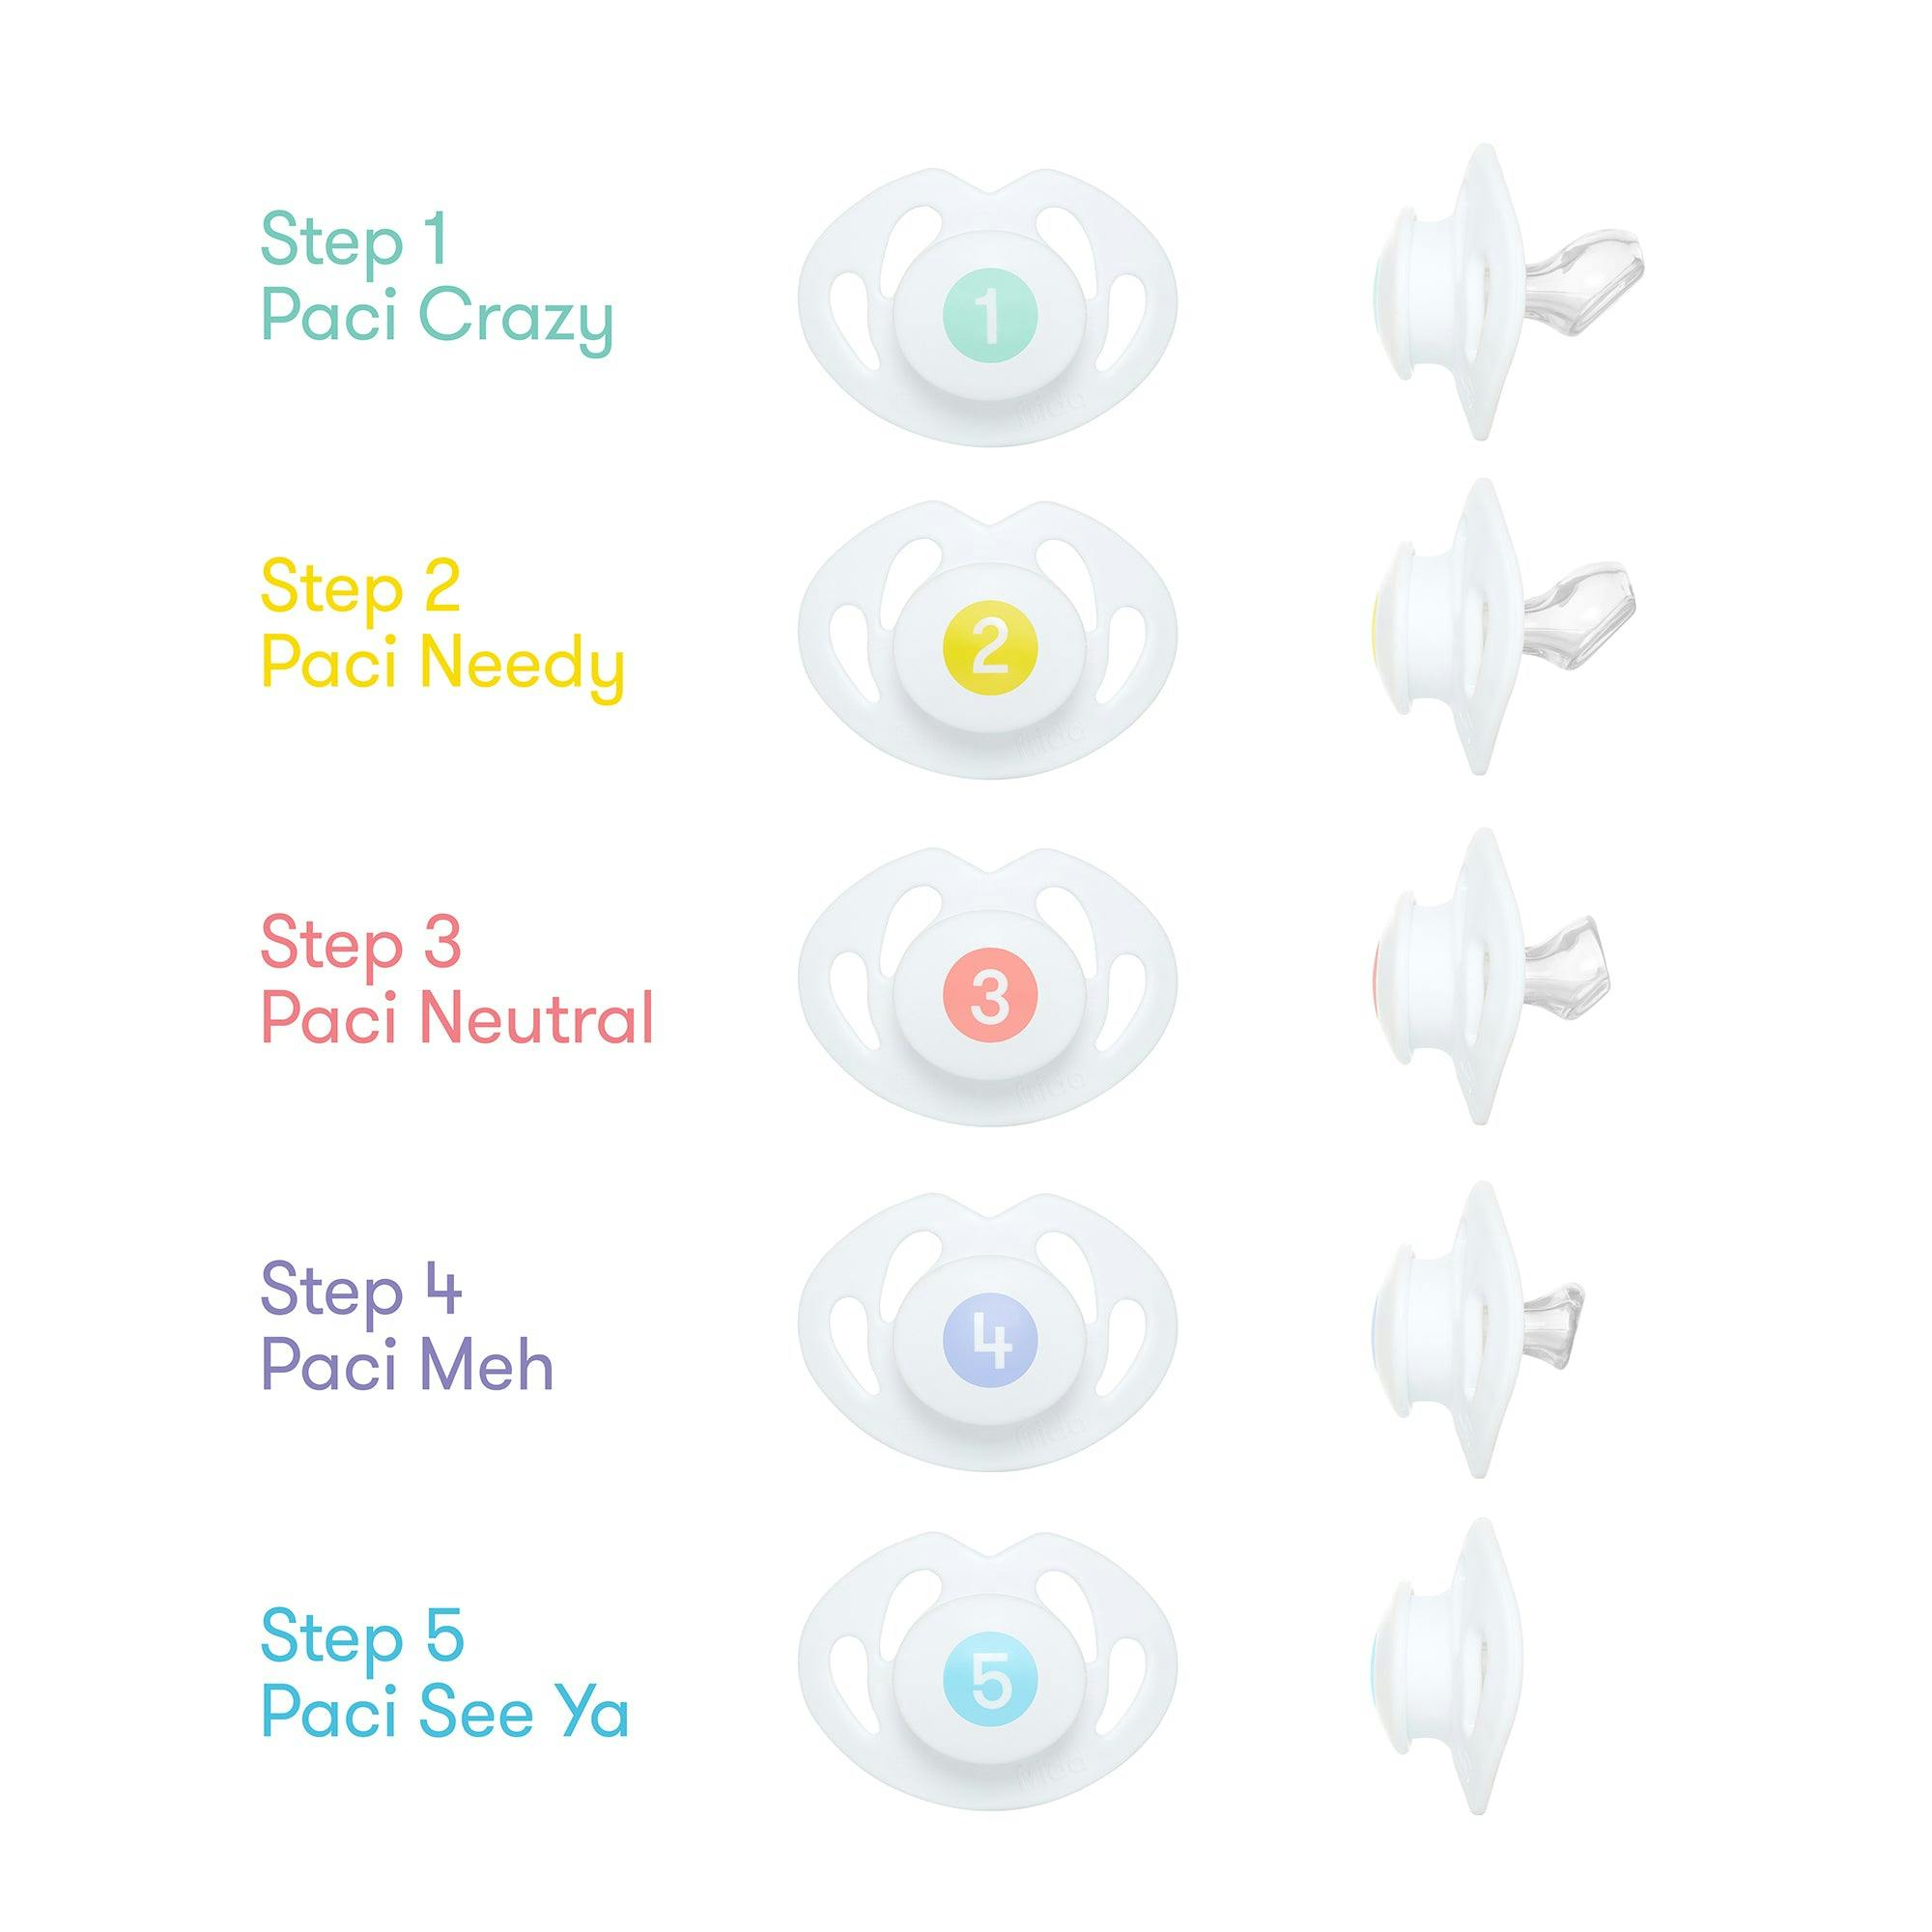 Fridababy Paci Weaning System